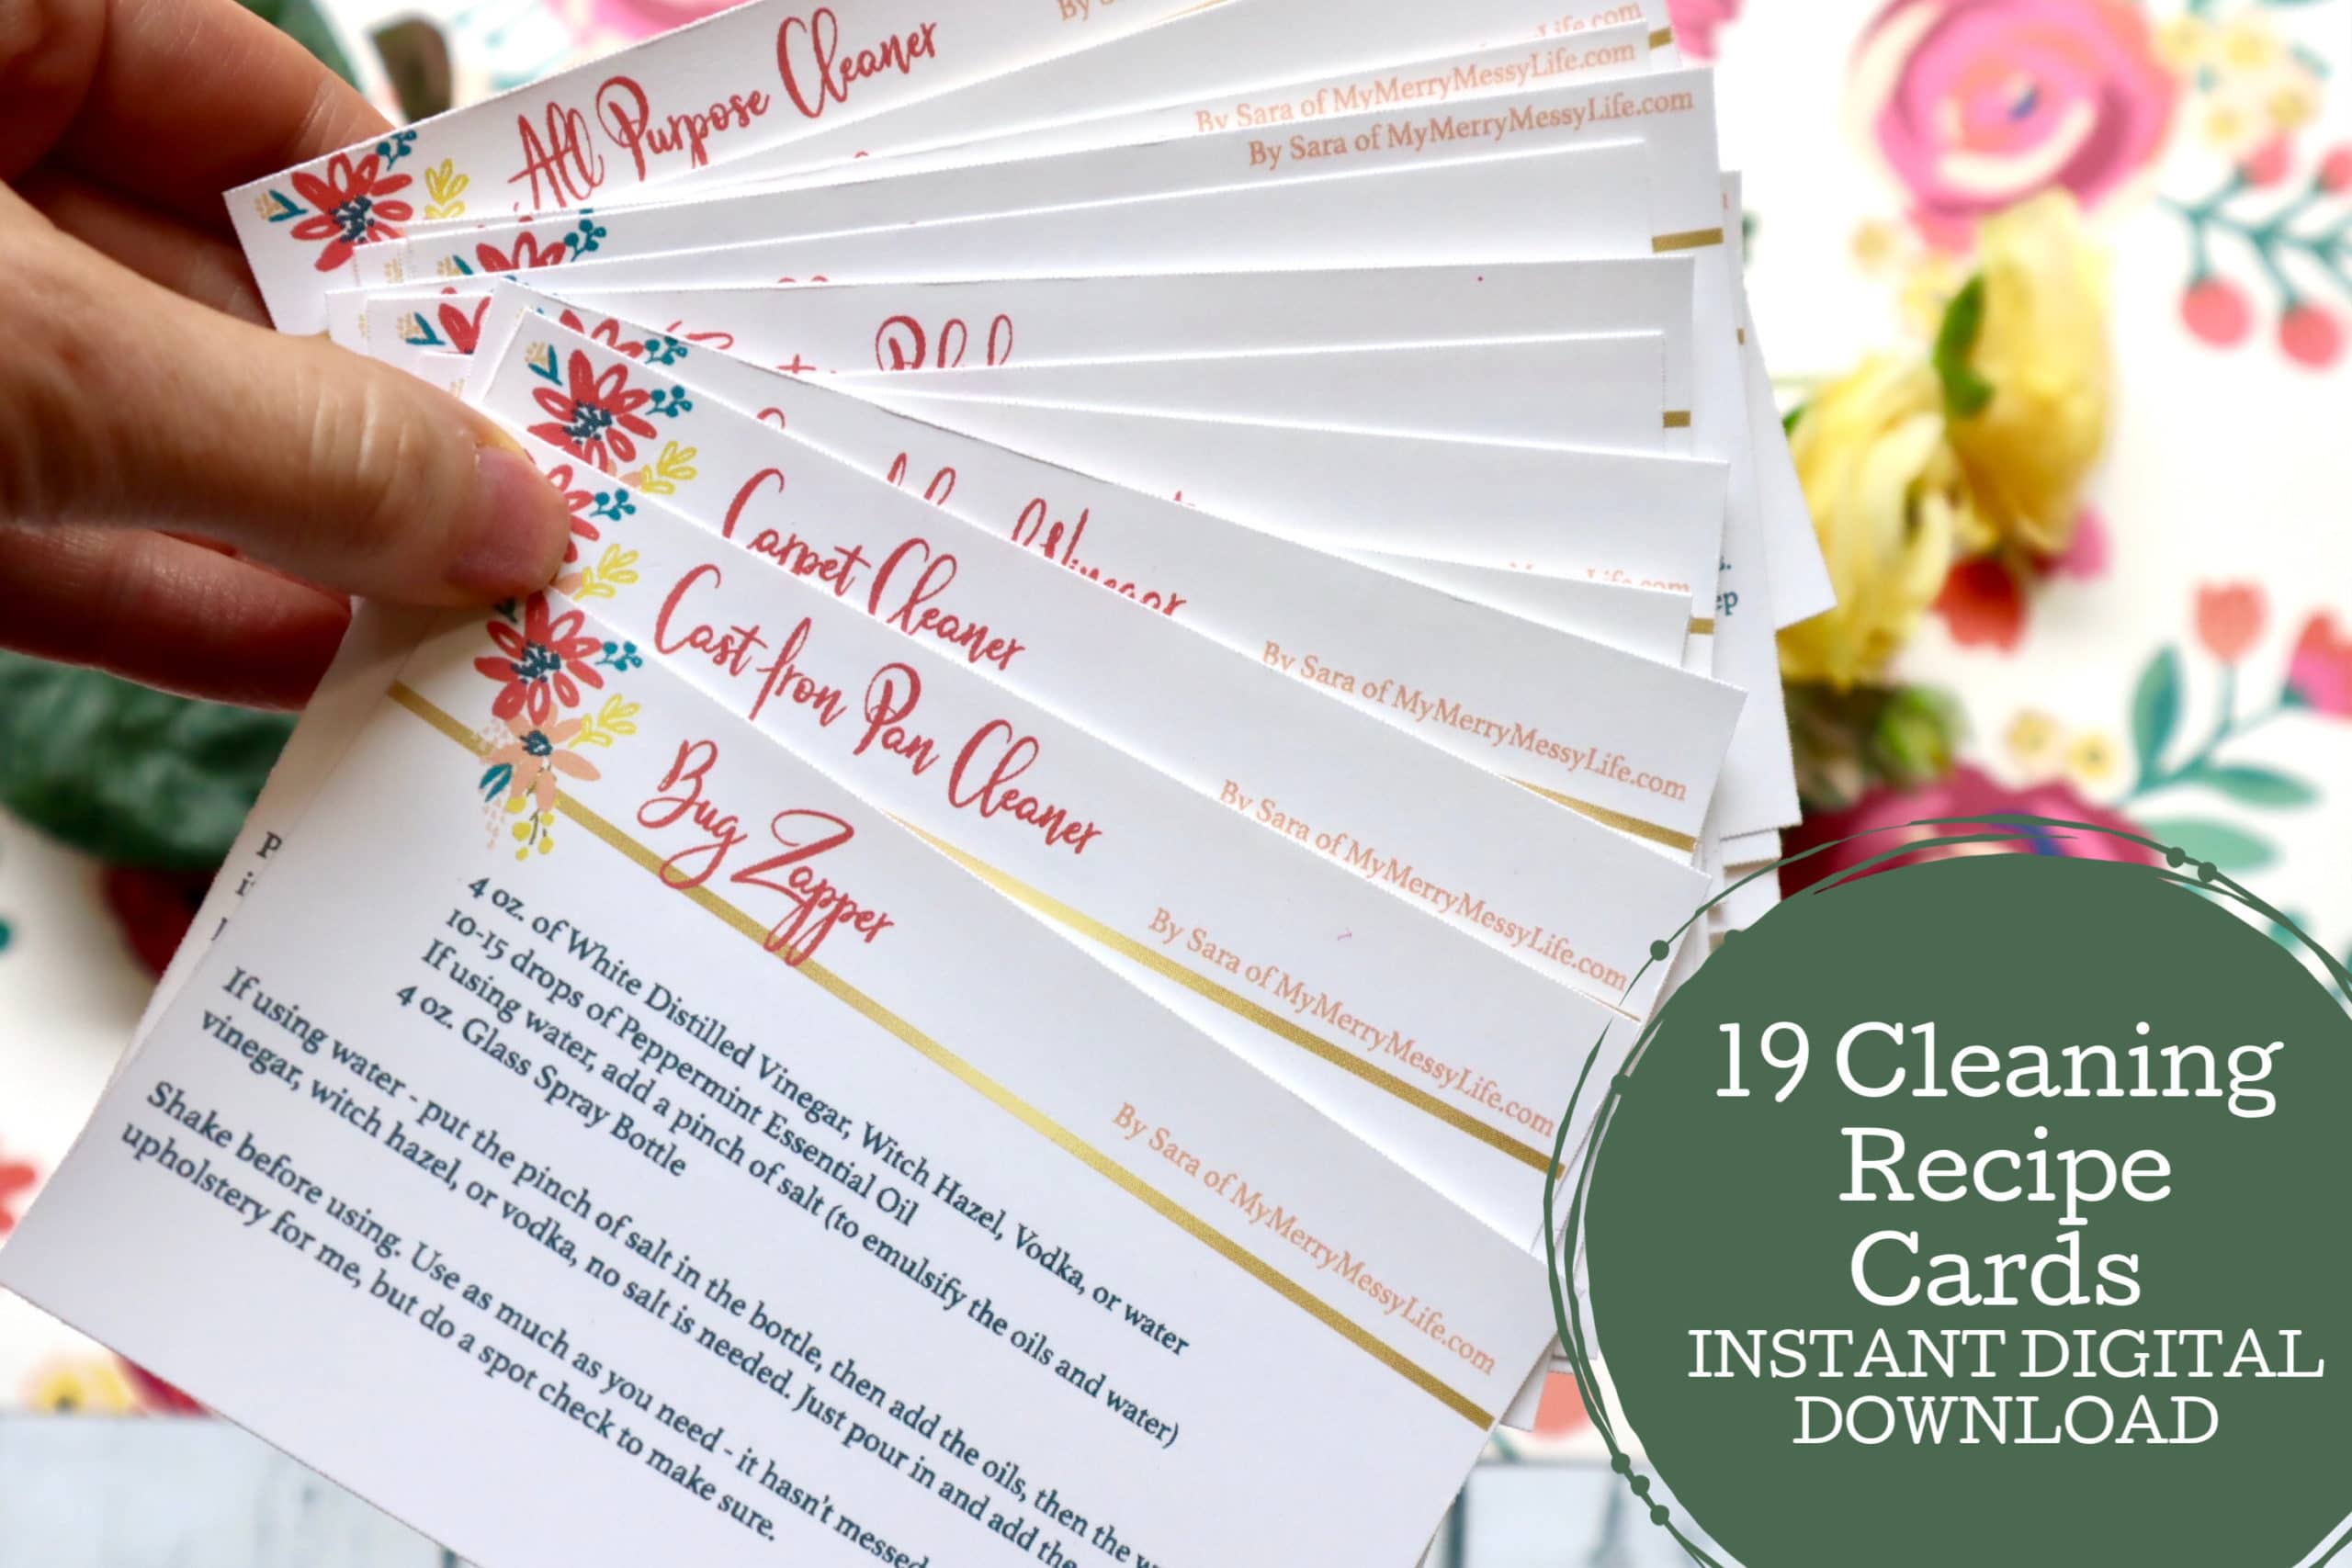 20 Natural Cleaning Recipe Cards - Printable Set to Help Keep You Organized